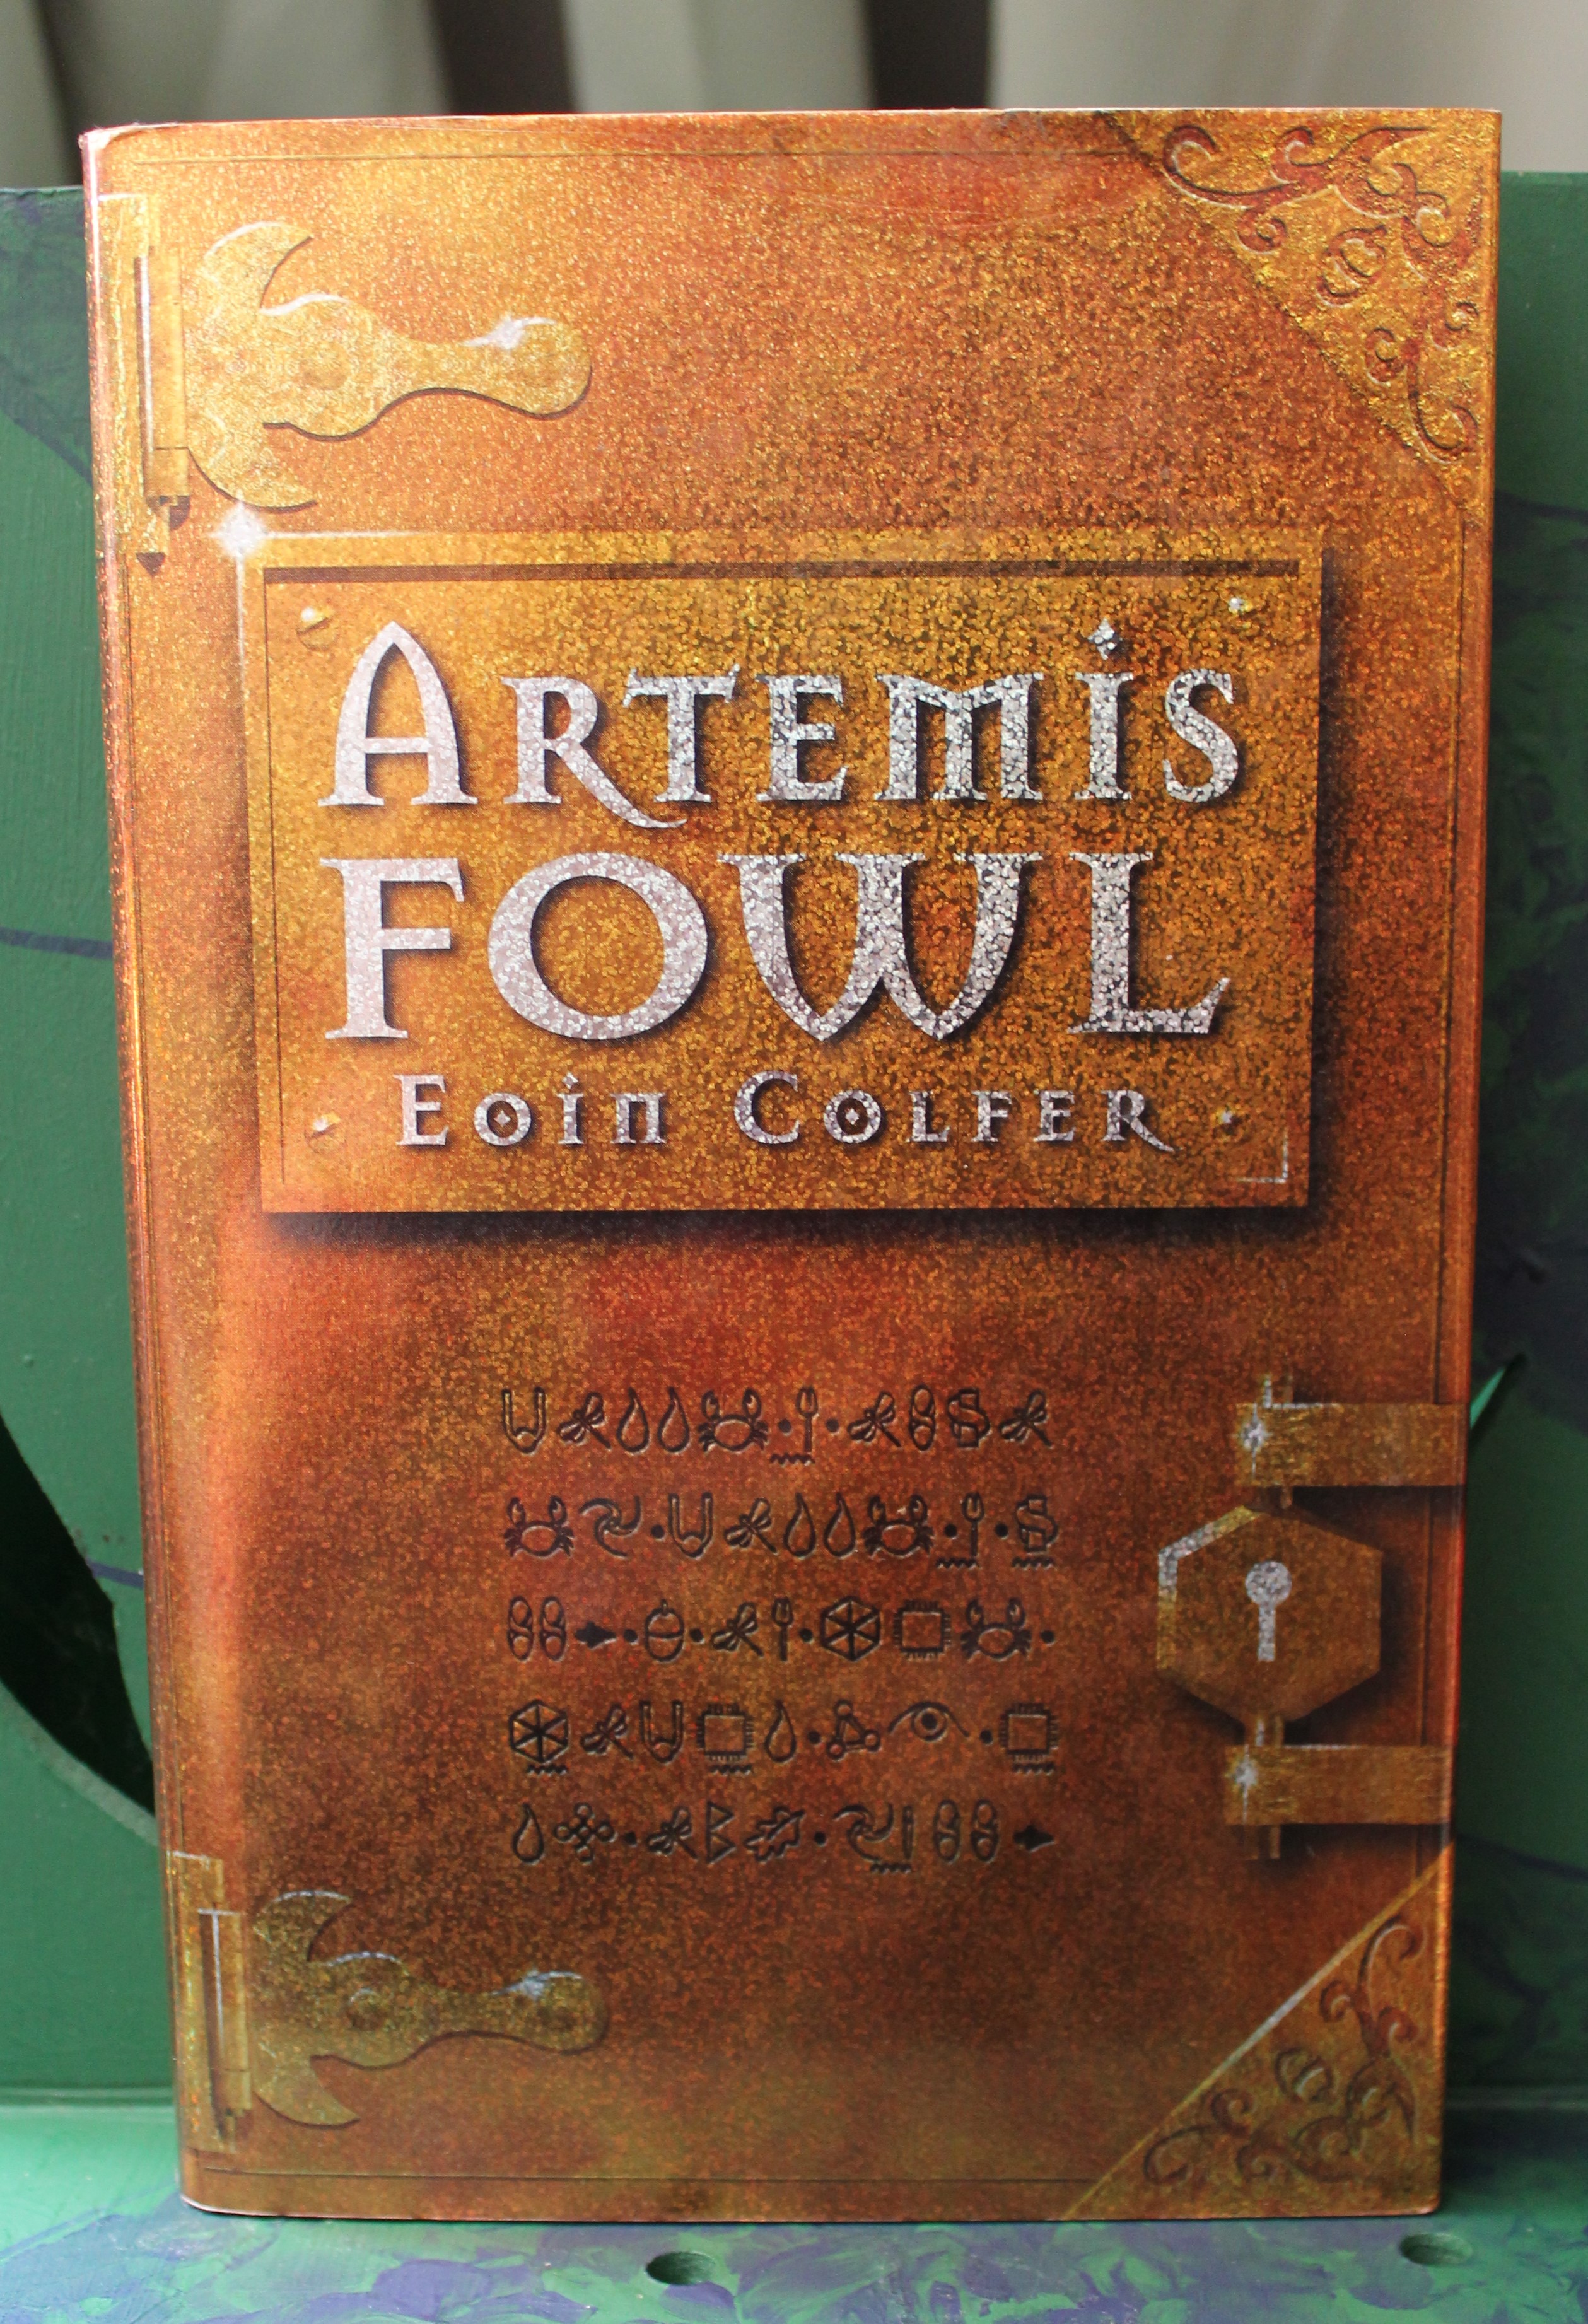 Artemis Fowl by Eoin Colfer: Very Good (2001) Signed by Author(s)